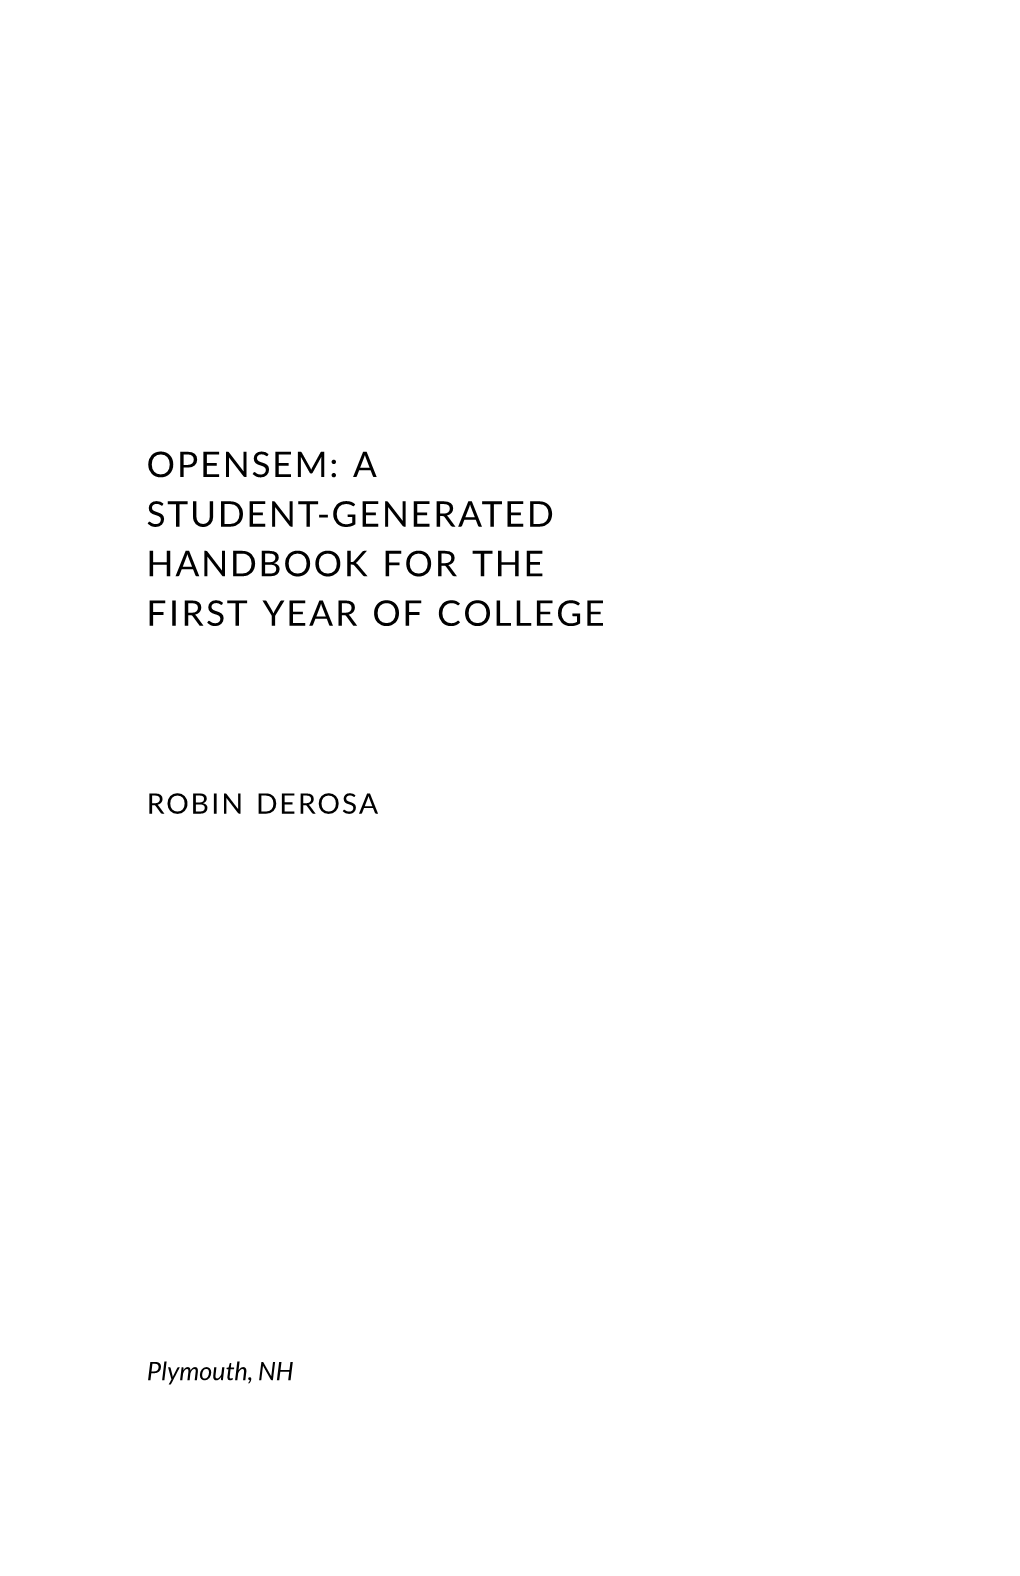 A Student-Generated Handbook for the First Year of College